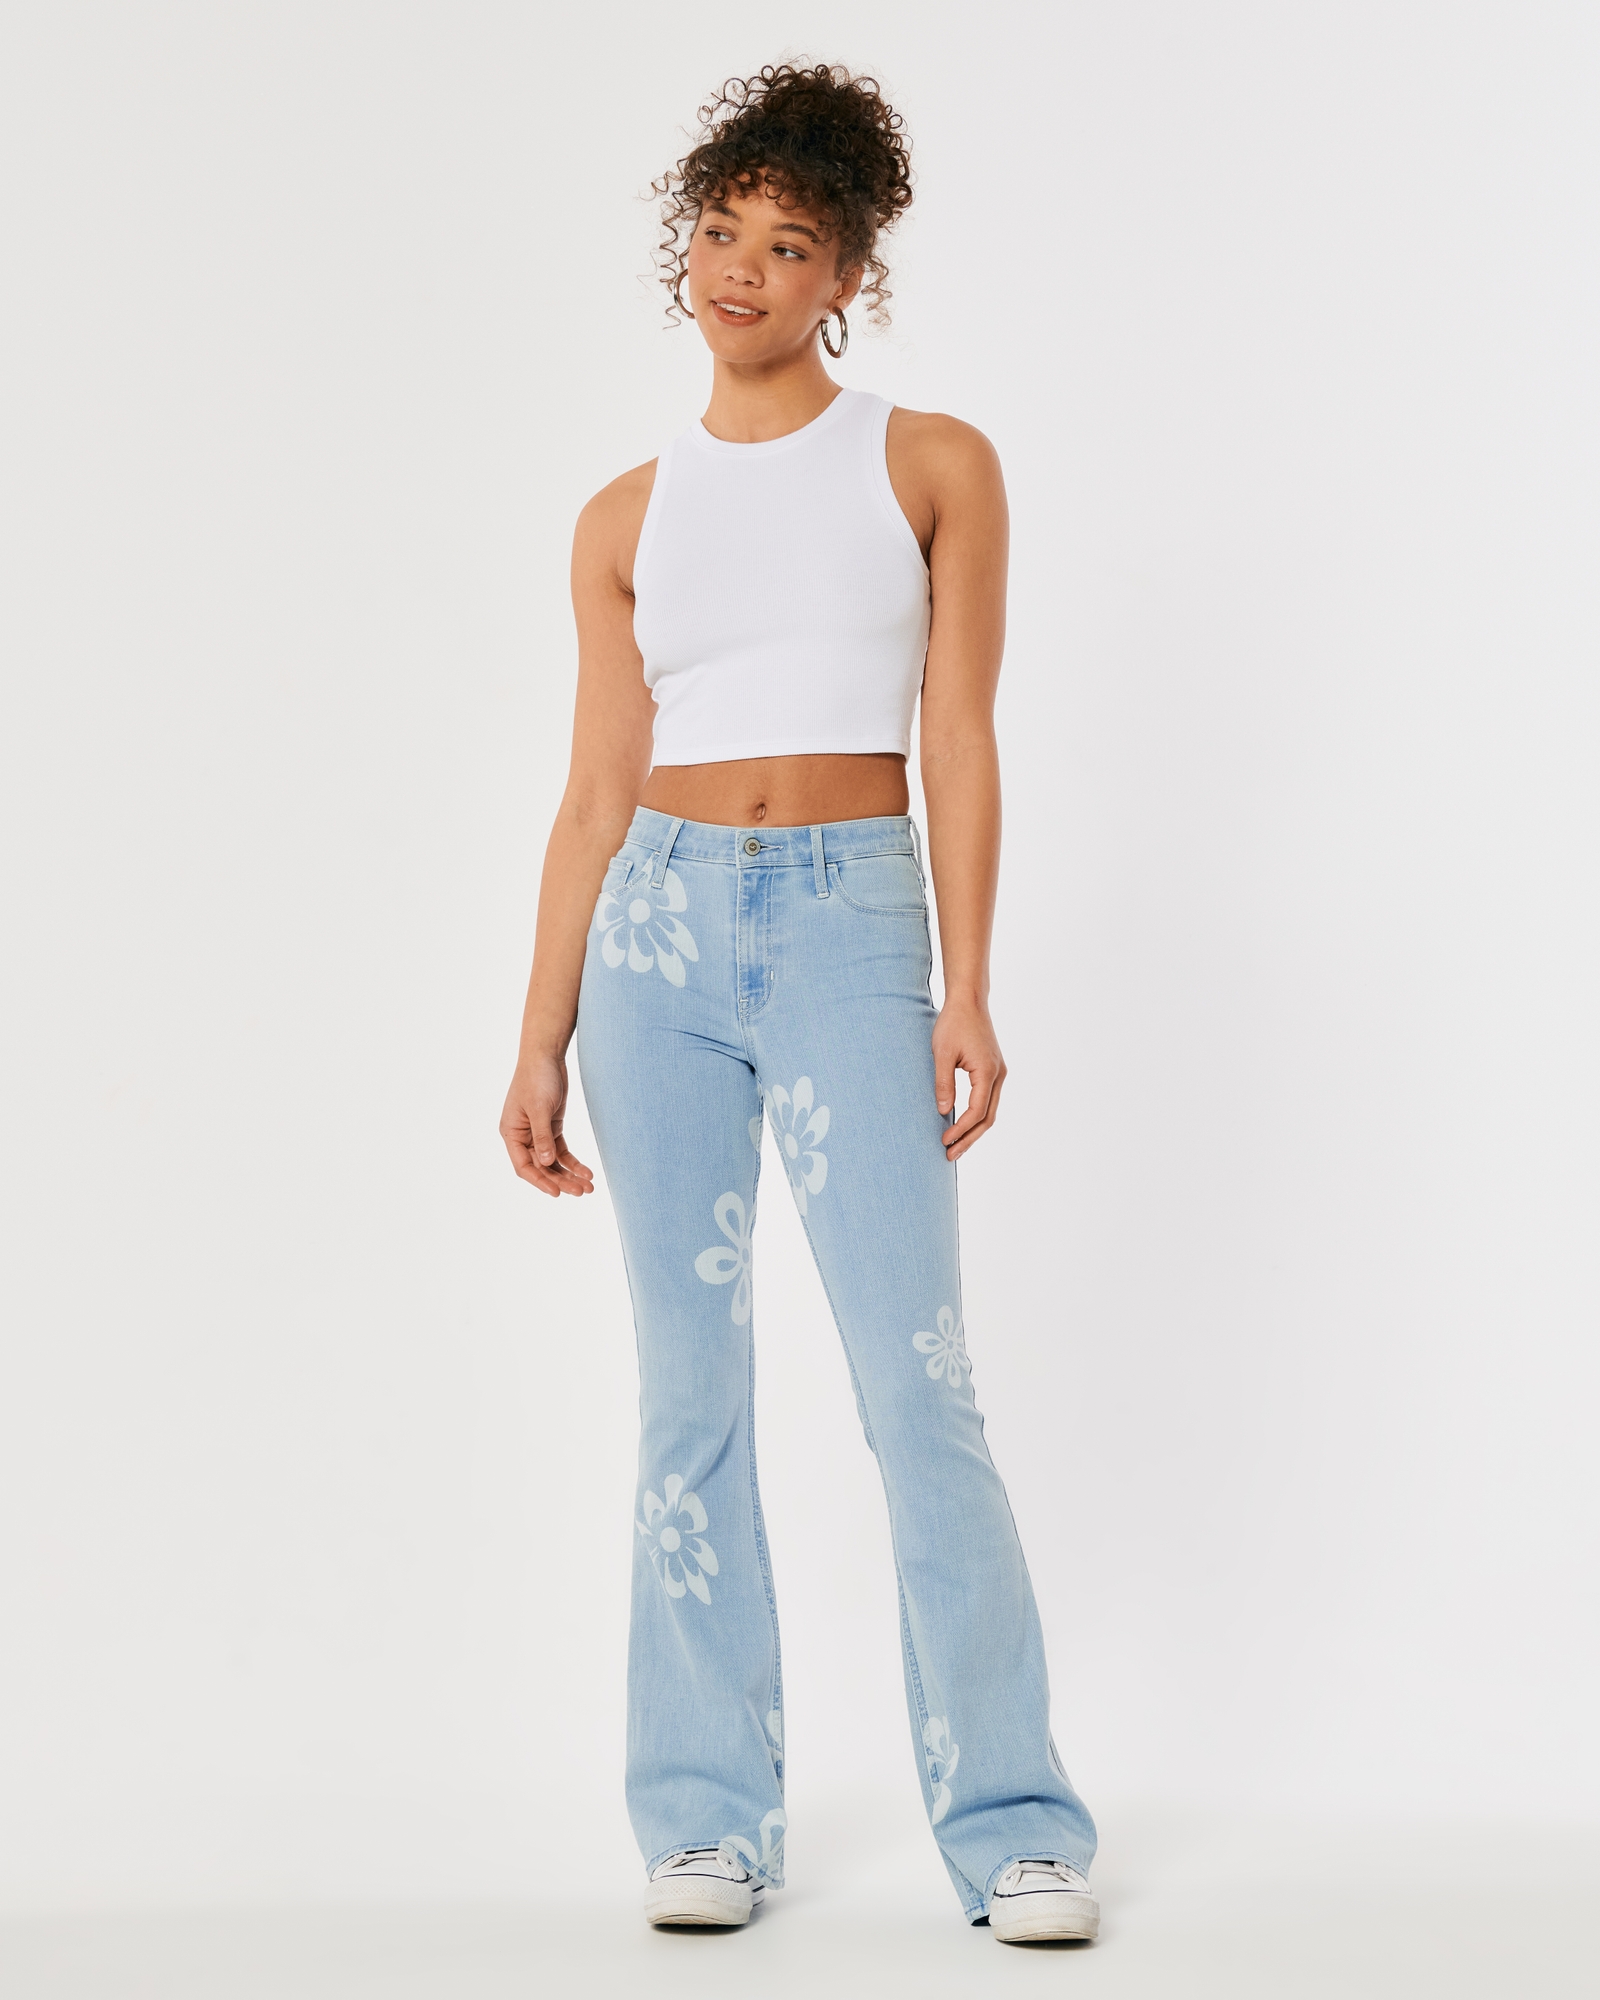 Hollister Curvy High Rise Vintage Flare Jeans Size undefined - $34 New With  Tags - From Heather